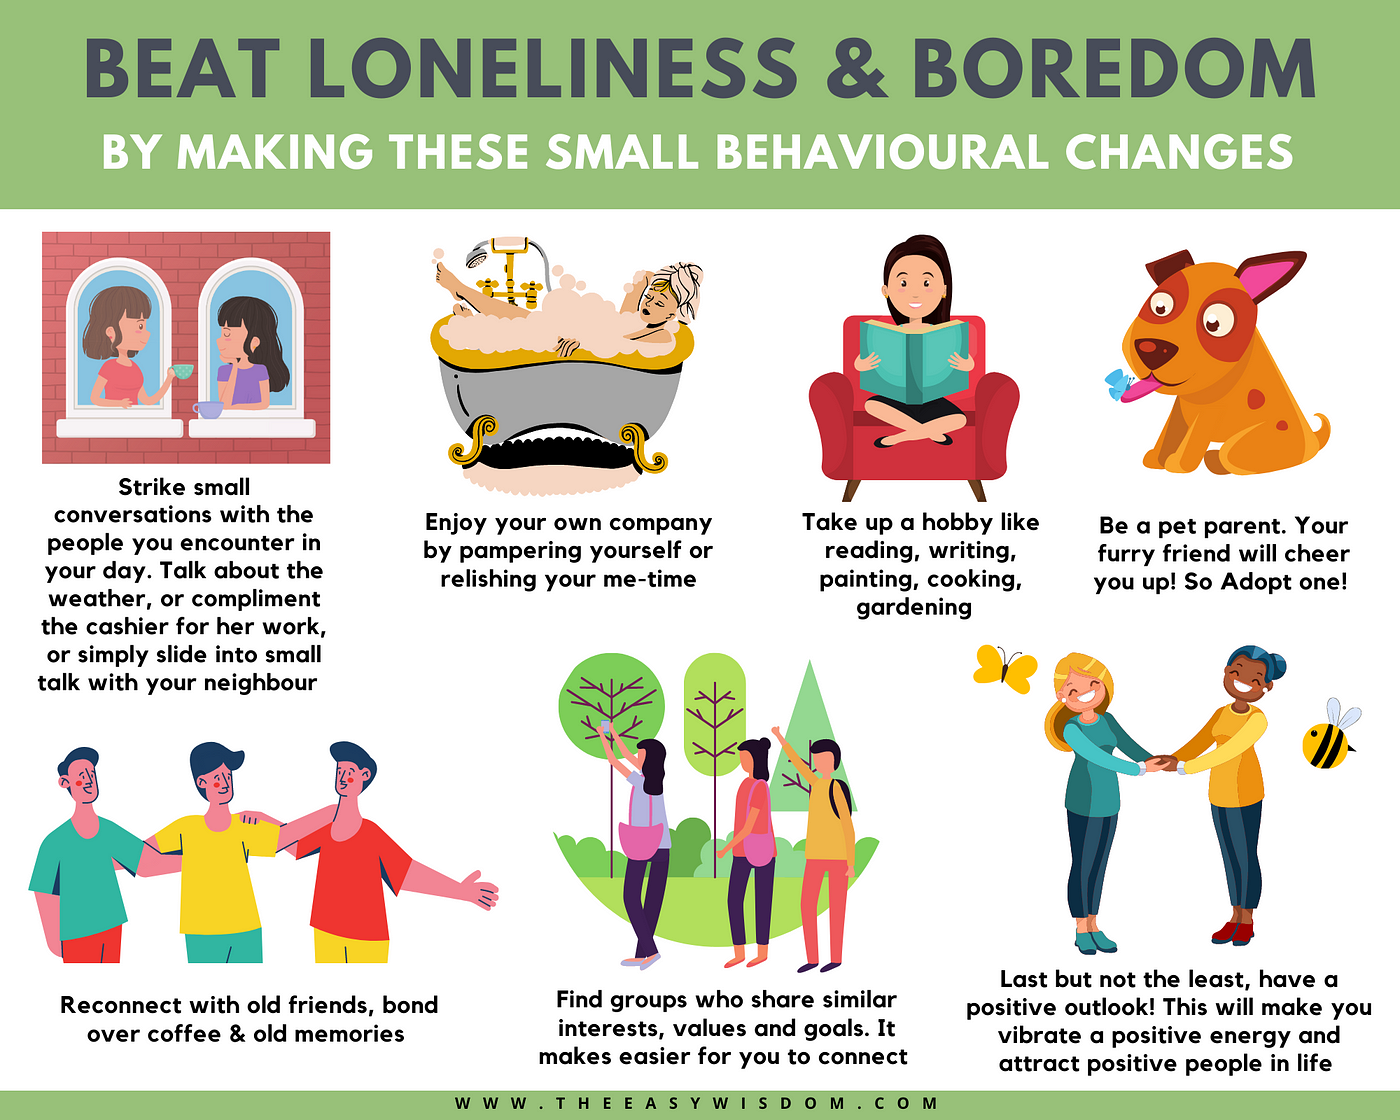 Feeling lonely? 9 things you can do to combat loneliness